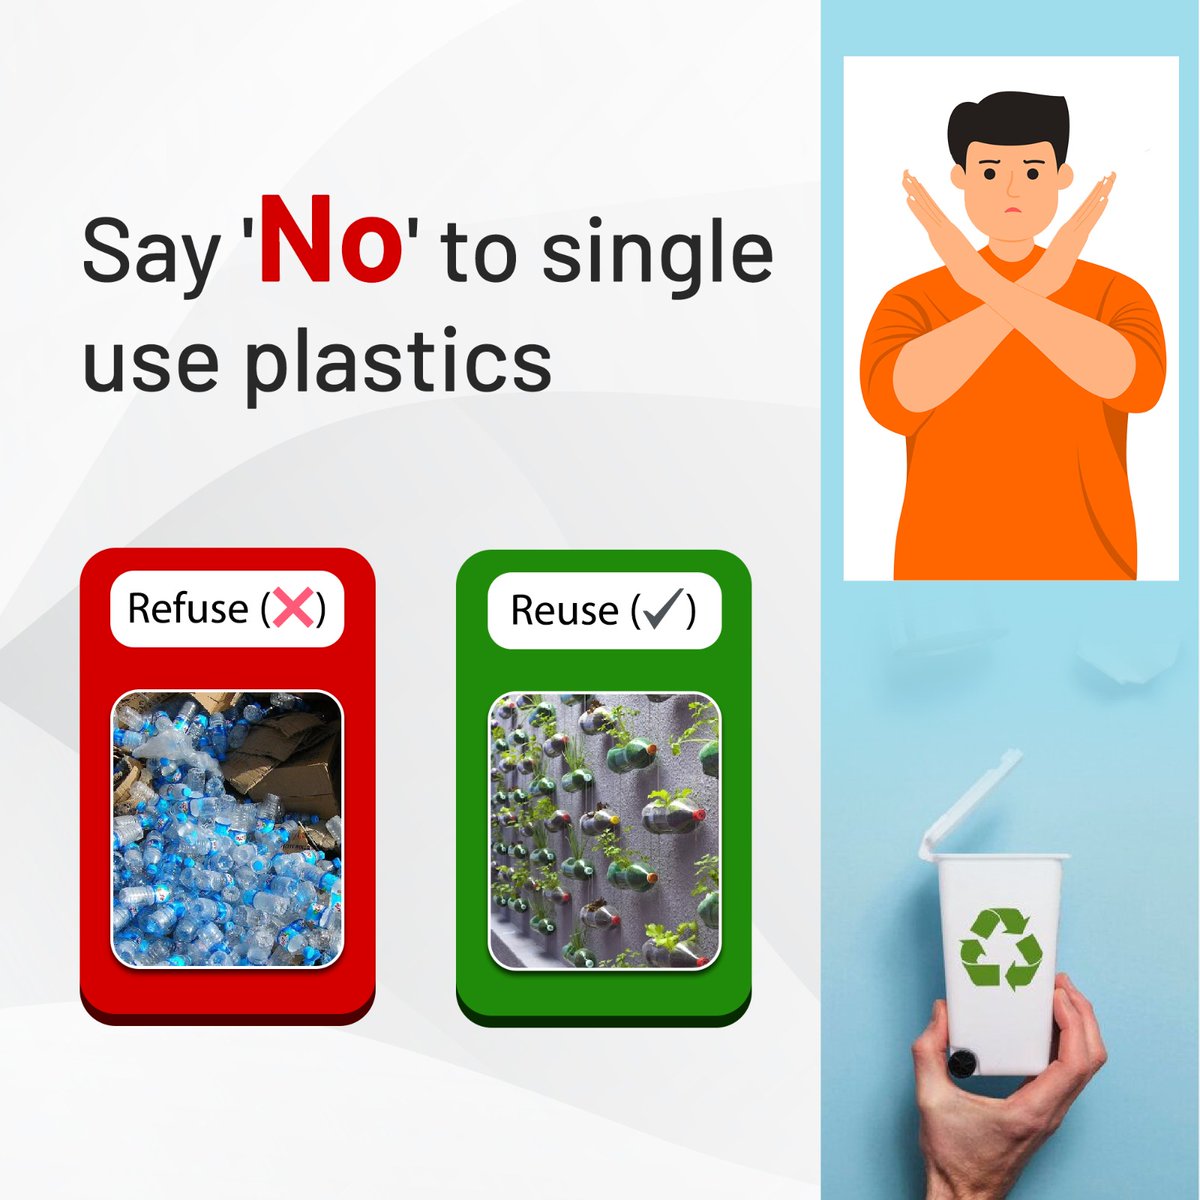 Let's take a stand against single-use plastics and embrace reusable alternatives to protect our planet. #SayNoToSUP